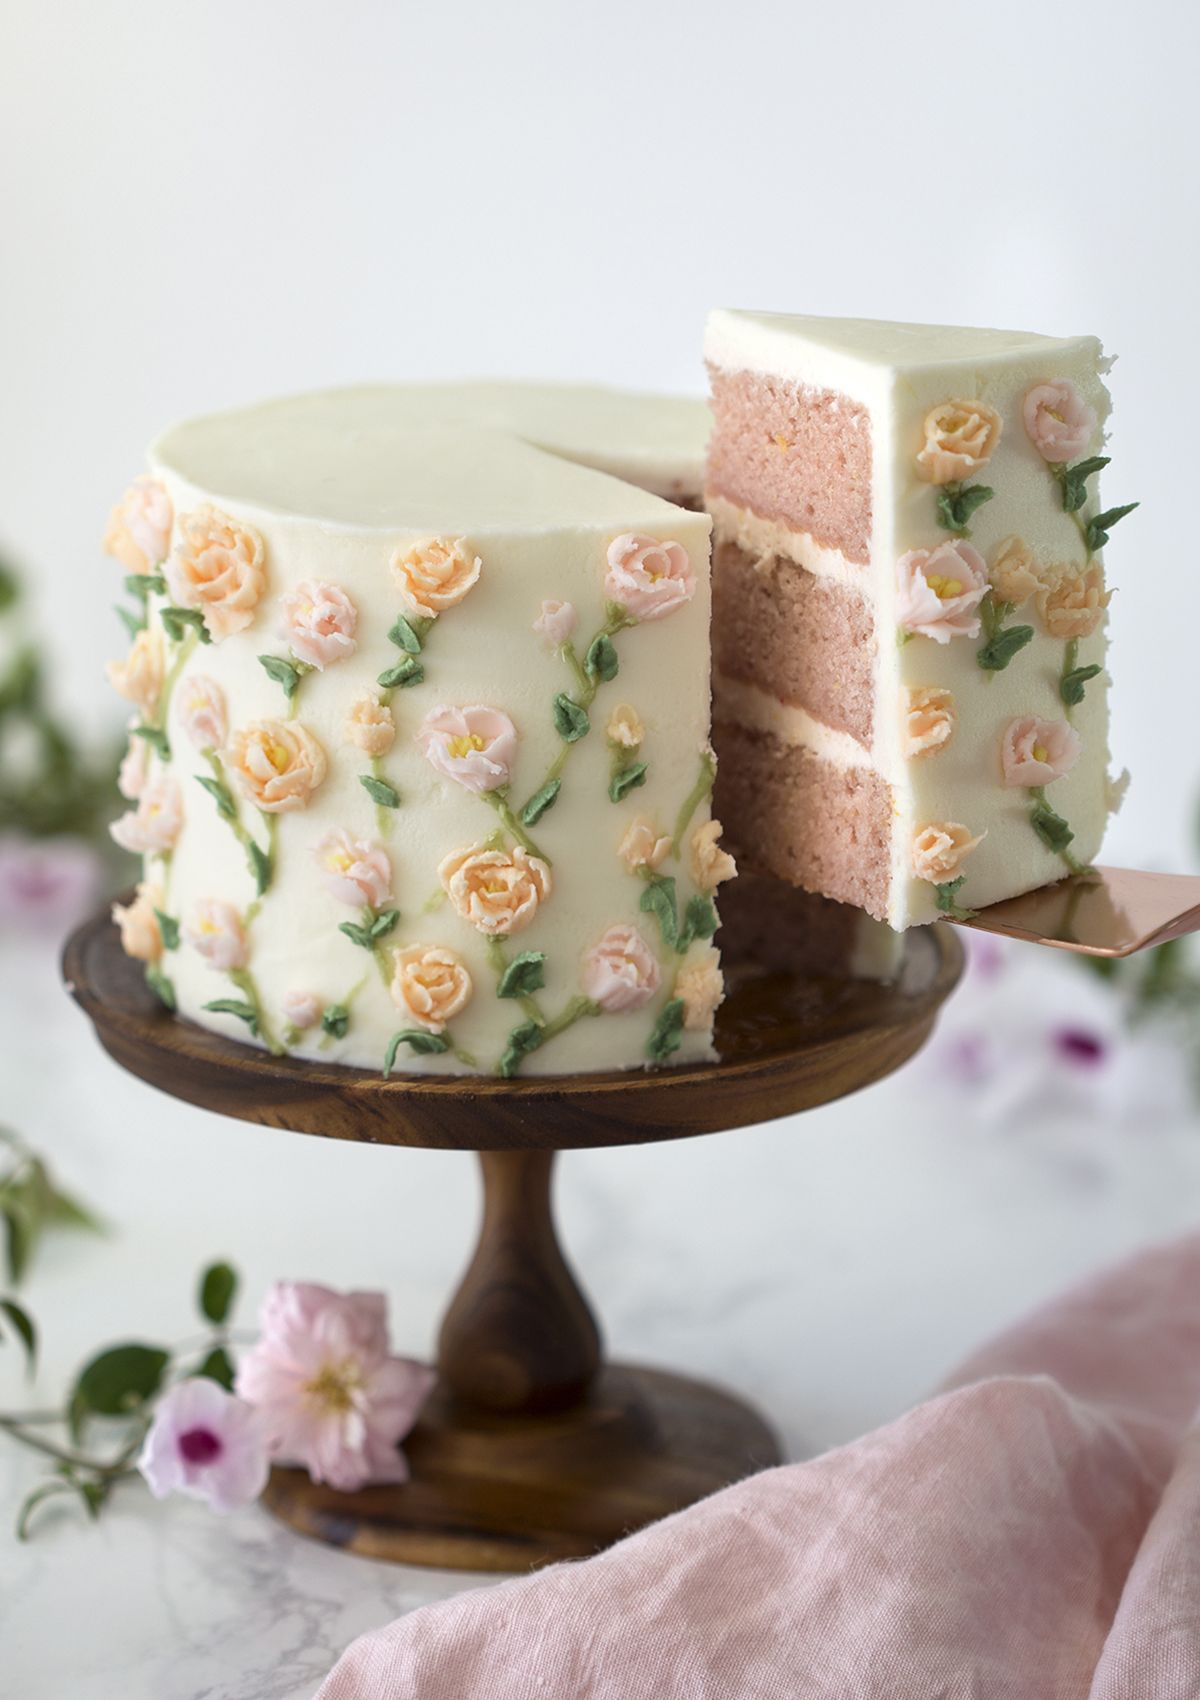 A moist strawberry cake with a kiss of lemon covered in delicate buttercream flowers. -   22 cake decor buttercream
 ideas